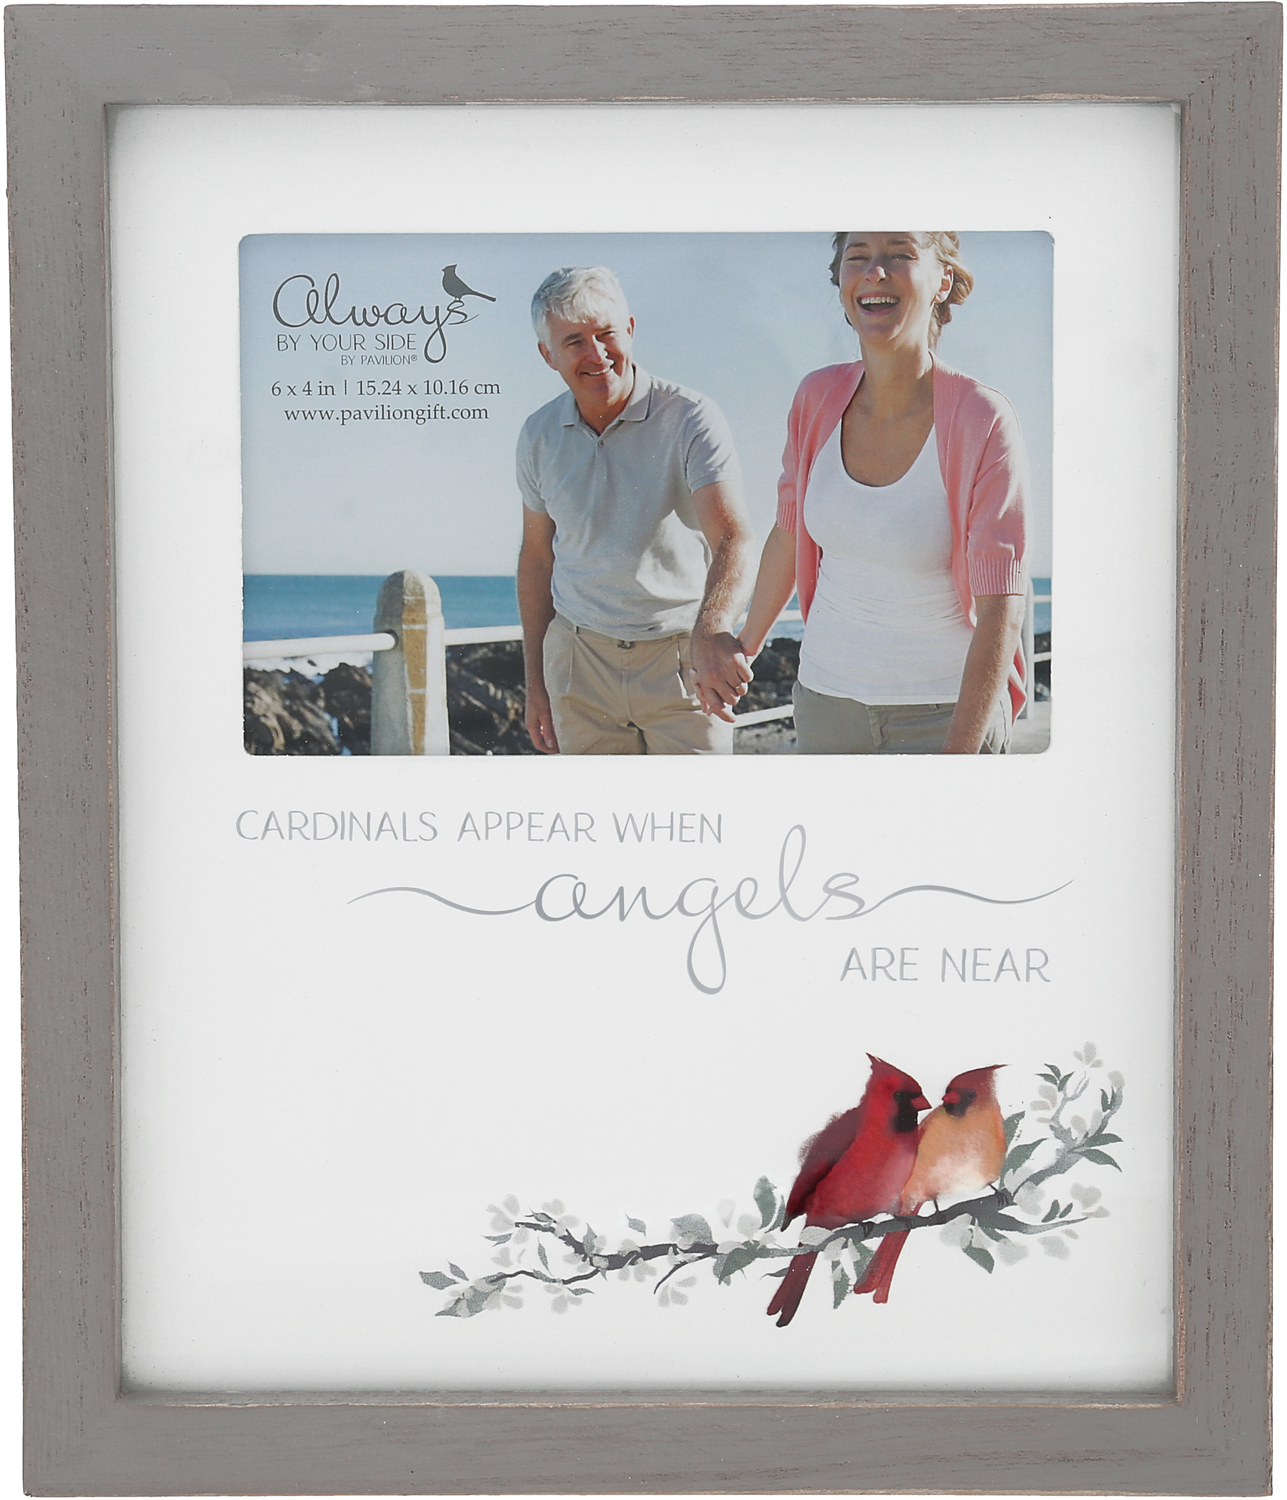 Cardinals Appear by Always by Your Side - Cardinals Appear - 8.5" x 10" Frame
(Holds 6" x 4" Photo)